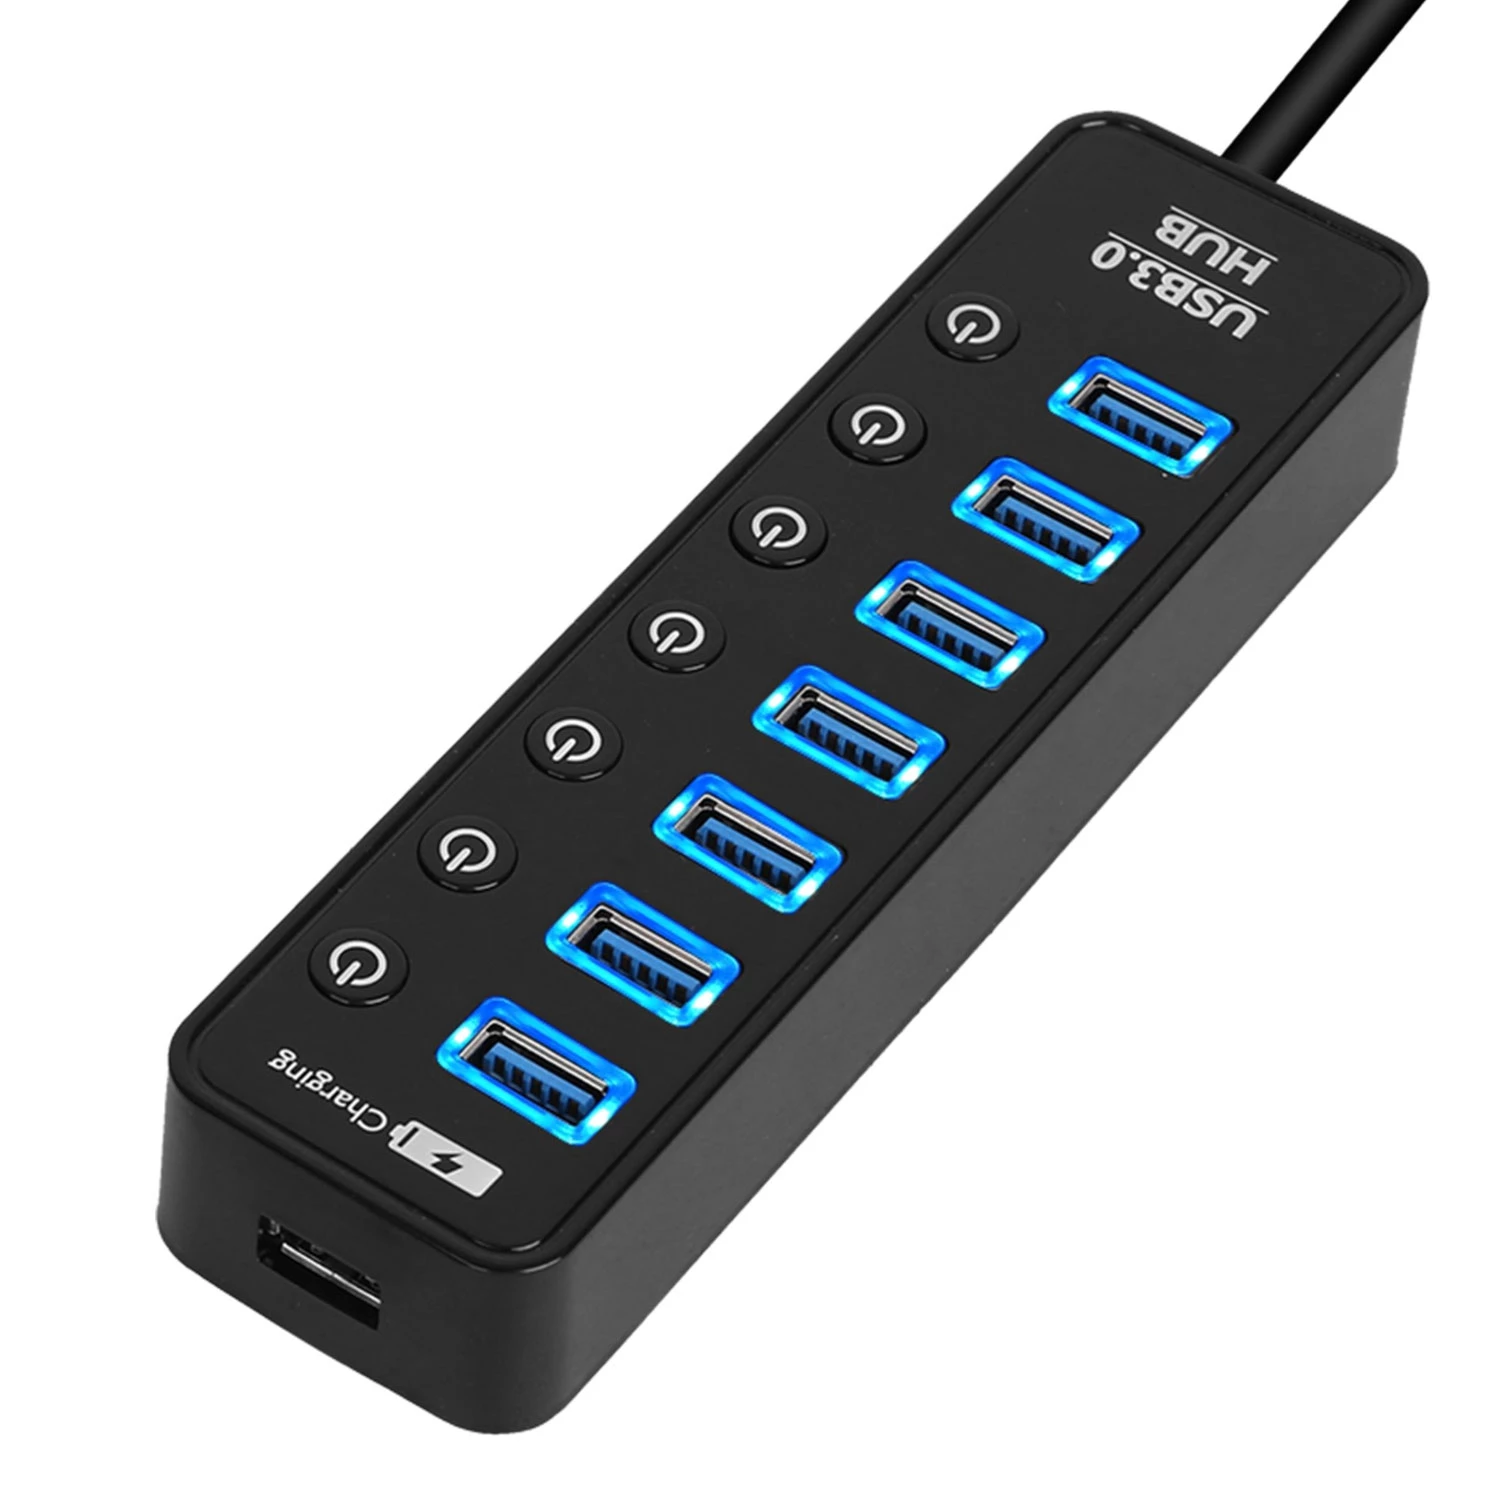 7 Port USB 3.0 Data Hub with Power Adapter - High Speed Sync, On/Off Switches